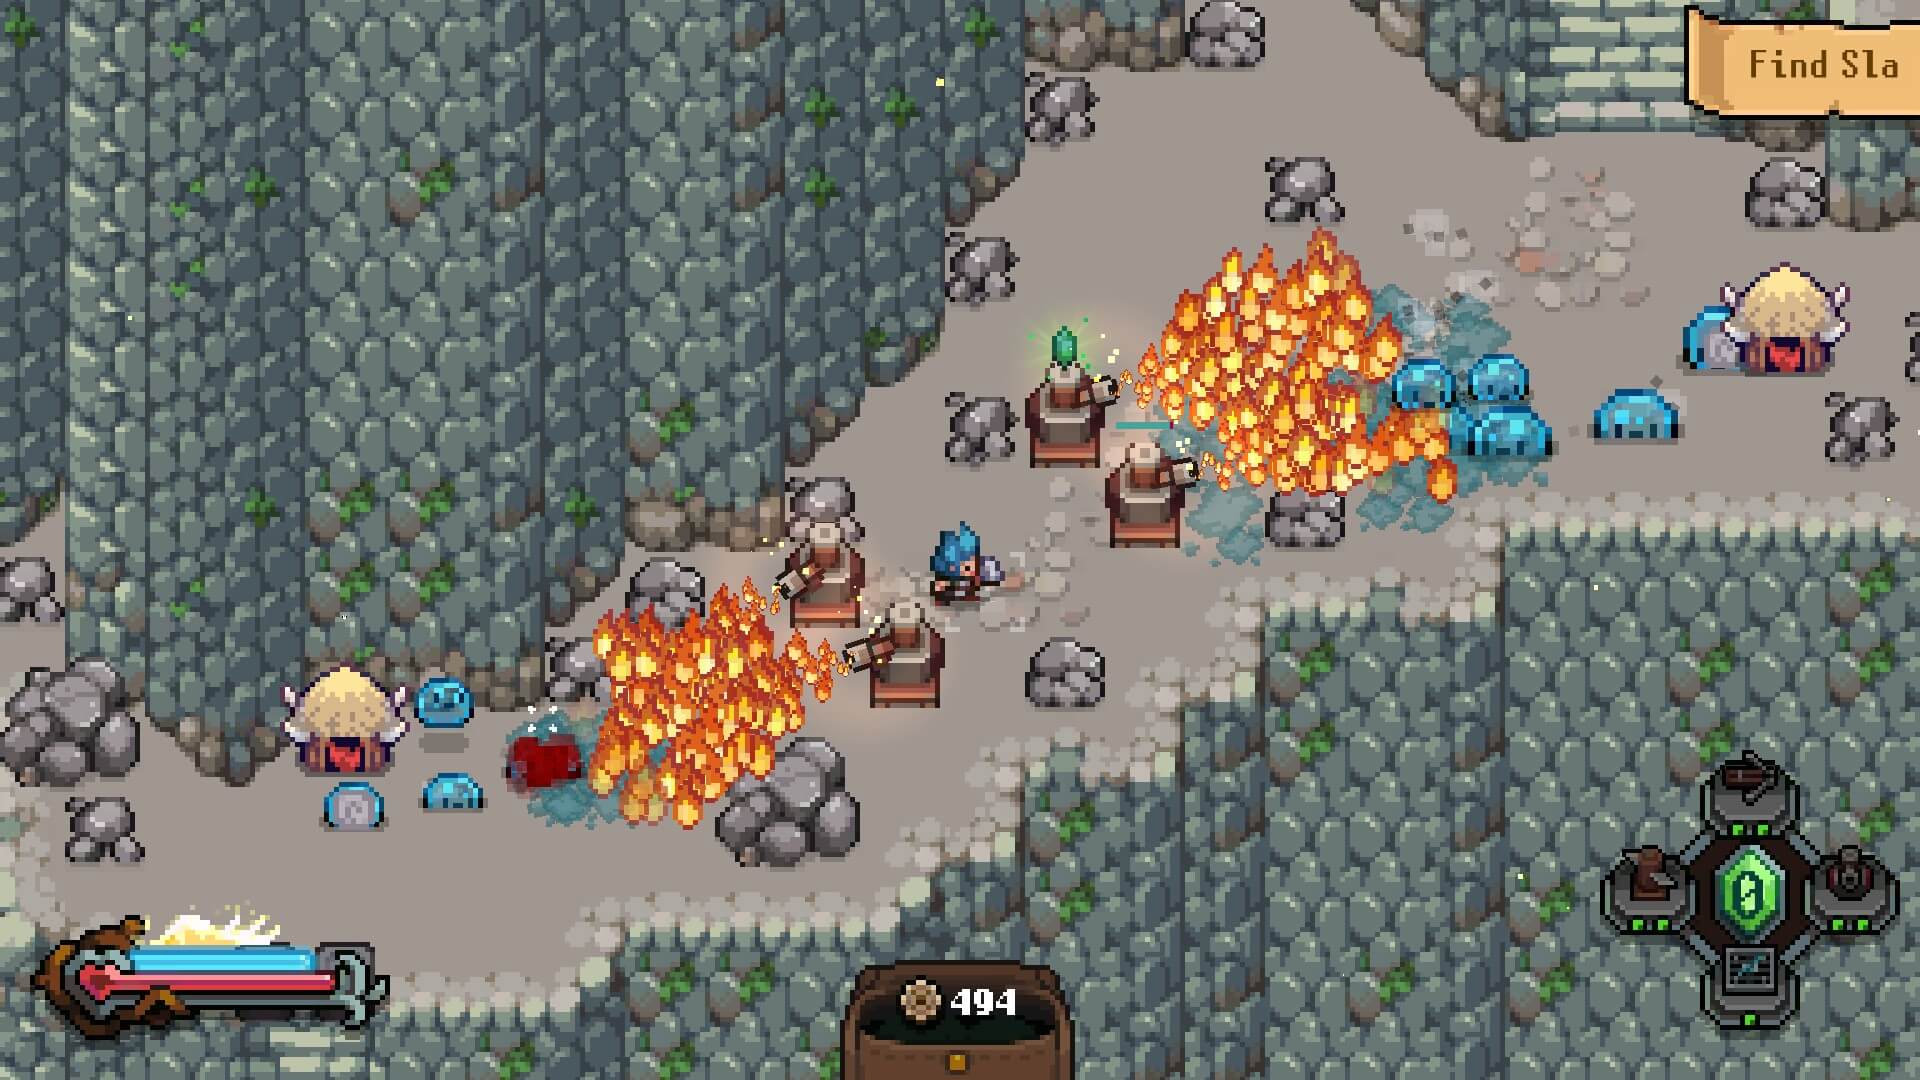 I have set up four flamethrowers to defend against a rush of slimes who are attacking.